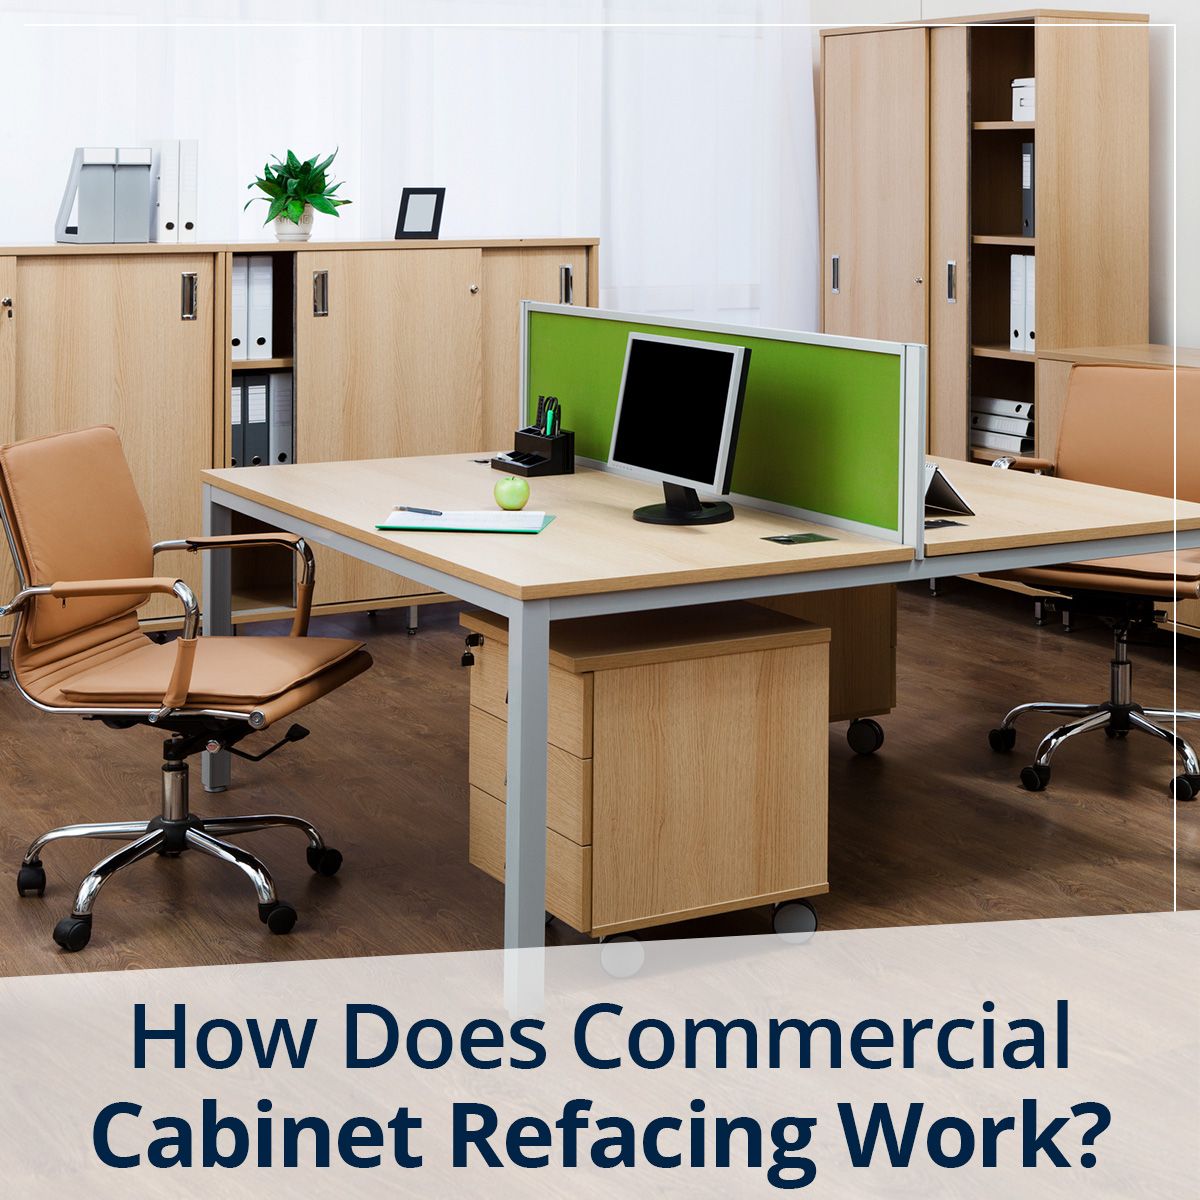 How Does Commercial Cabinet Refacing Work?